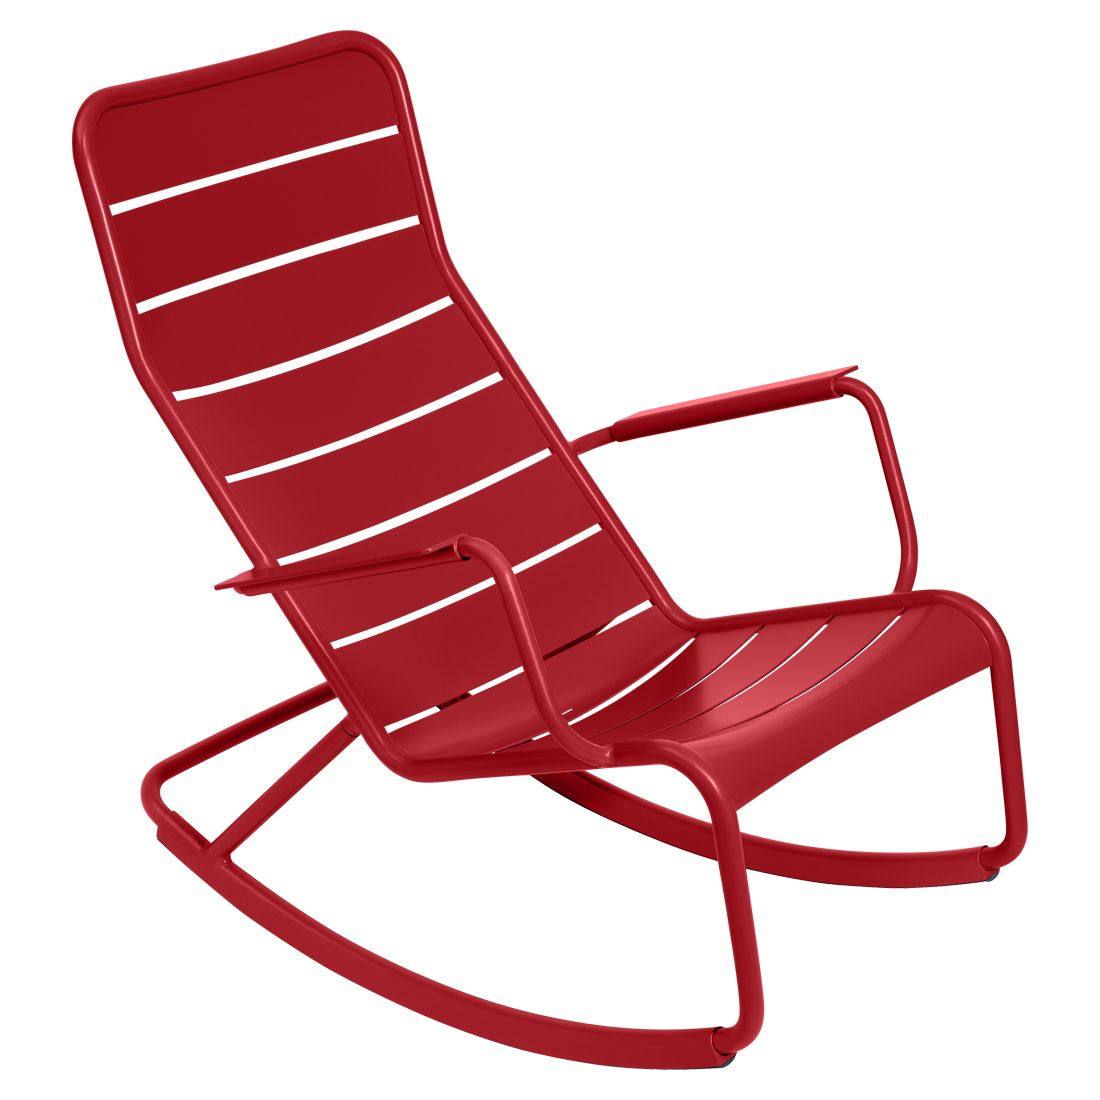 Luxembourg Rocking Chair concernant Rocking Chair Jardin